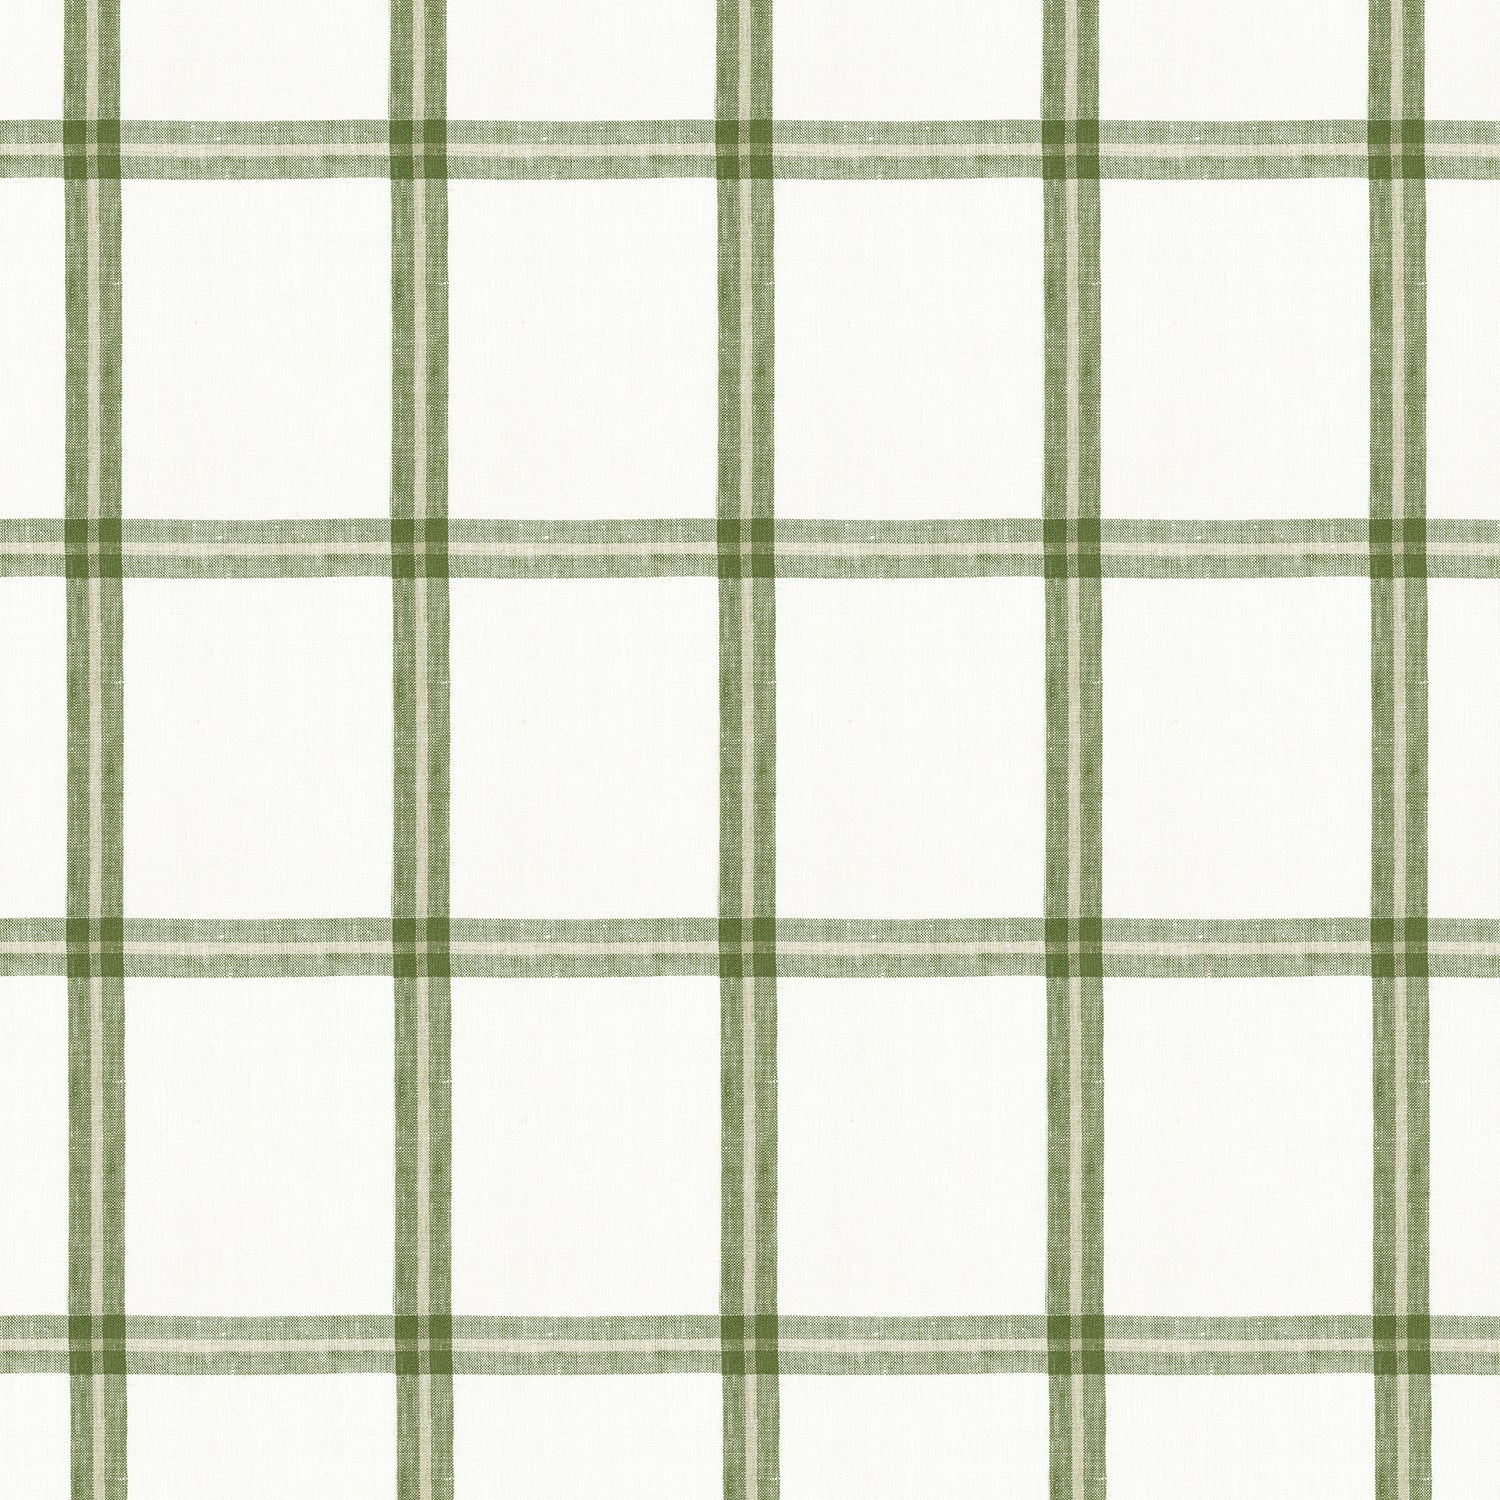 Huntington Plaid fabric in spruce color - pattern number W781332 - by Thibaut in the Montecito collection